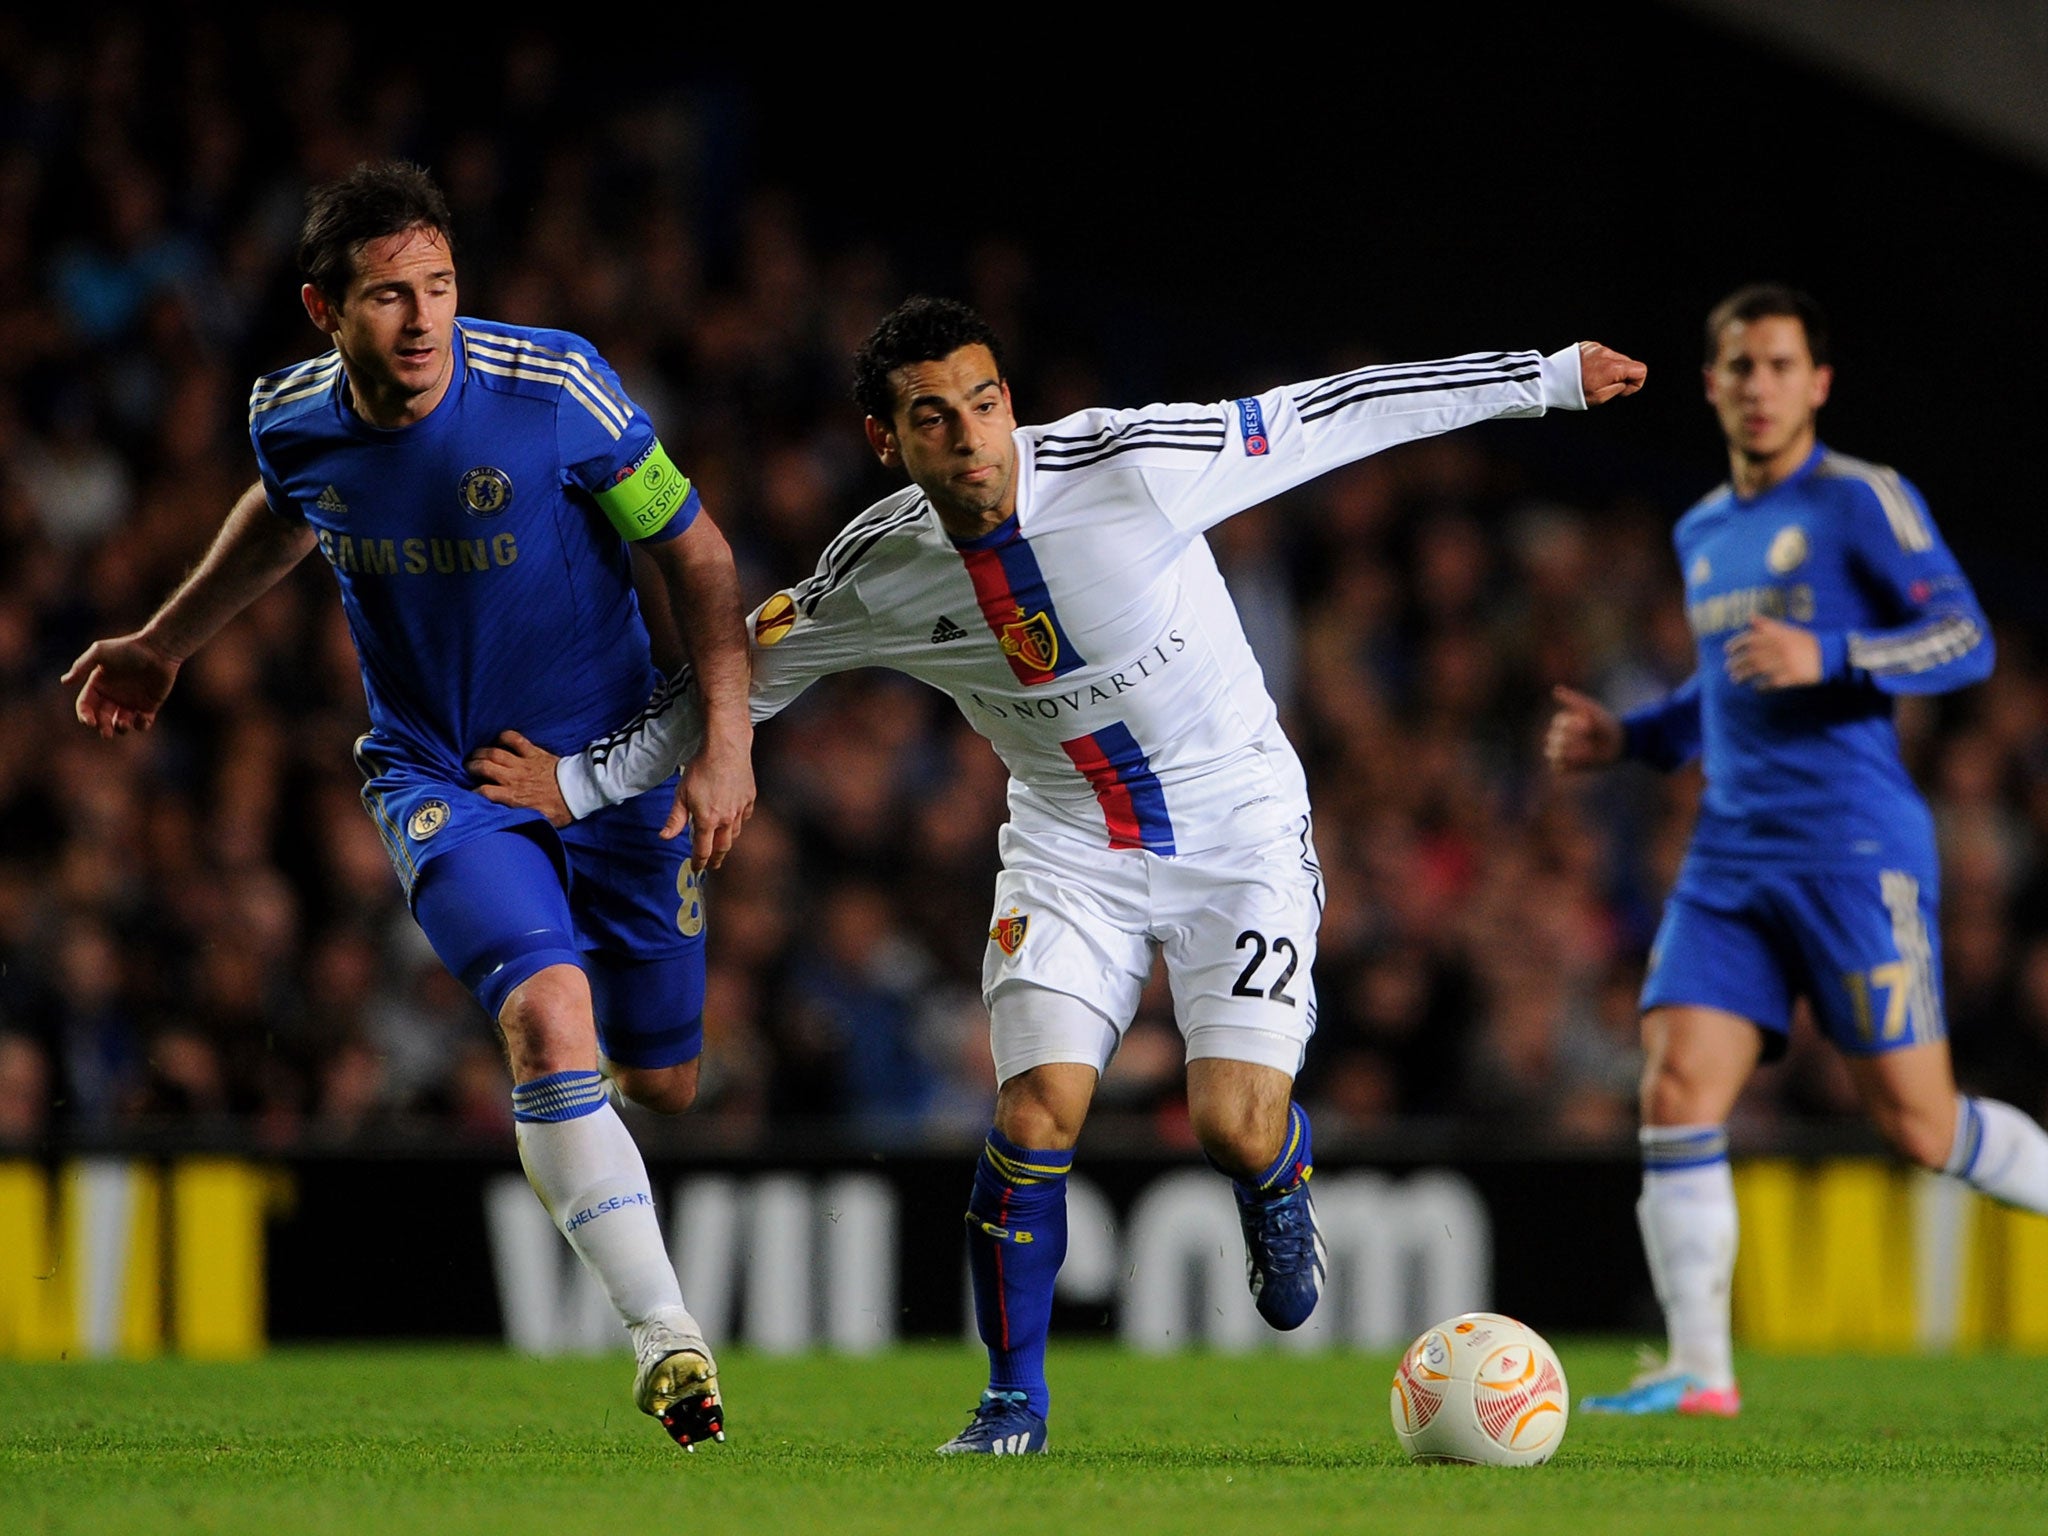 Mohamed Salah, of Basel, holds off Chelsea's Frank Lampard during their Europa League semi final second leg at Stamford Bridge last May